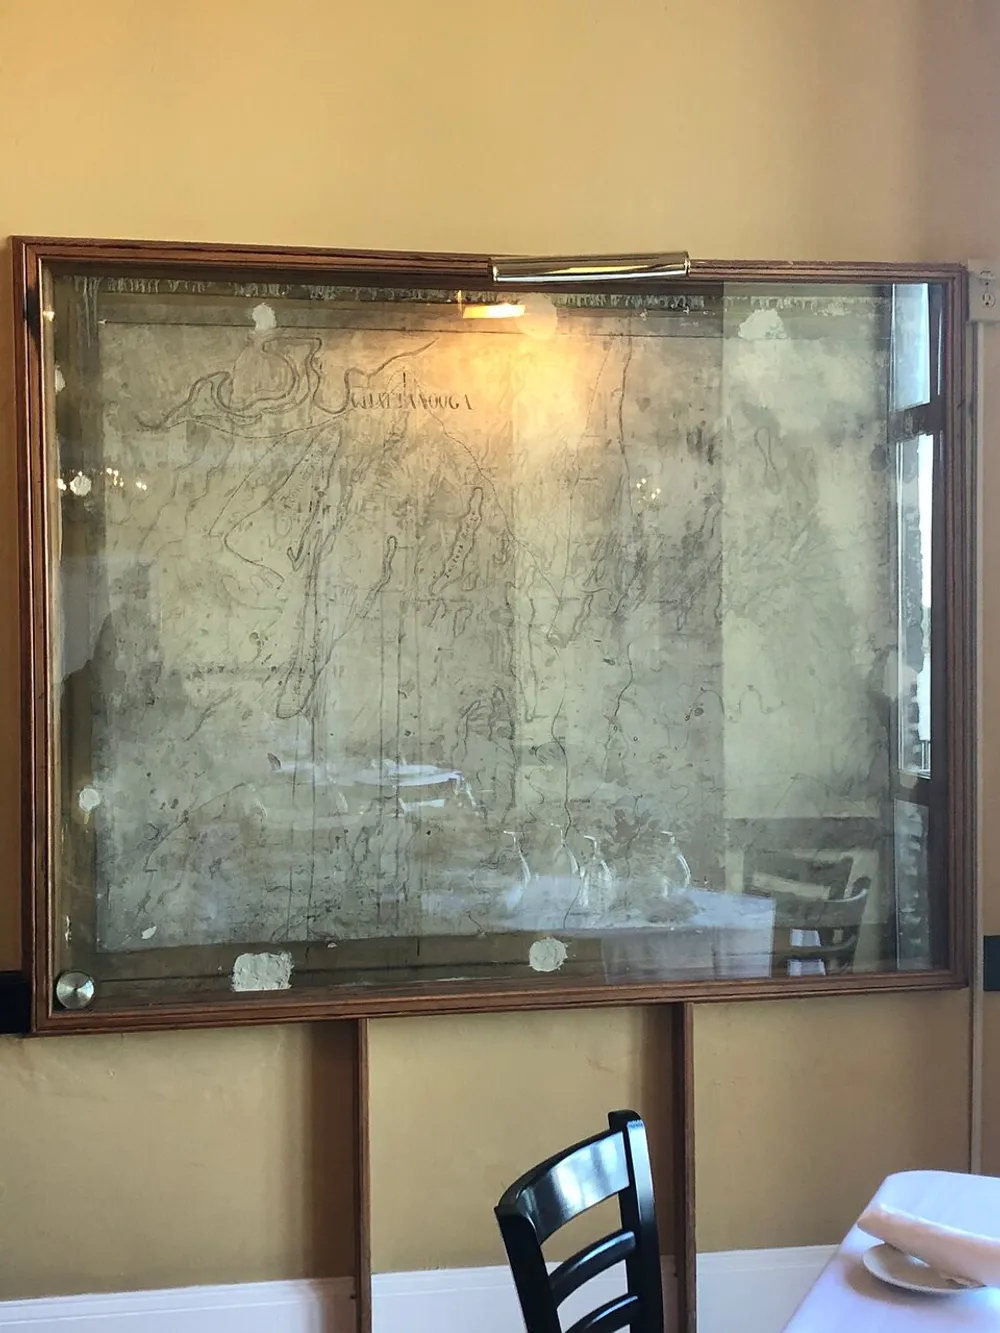 This image shows a framed worn and aged document or drawing mounted on a wall viewed through a reflective glass surface which reveals some items in the room